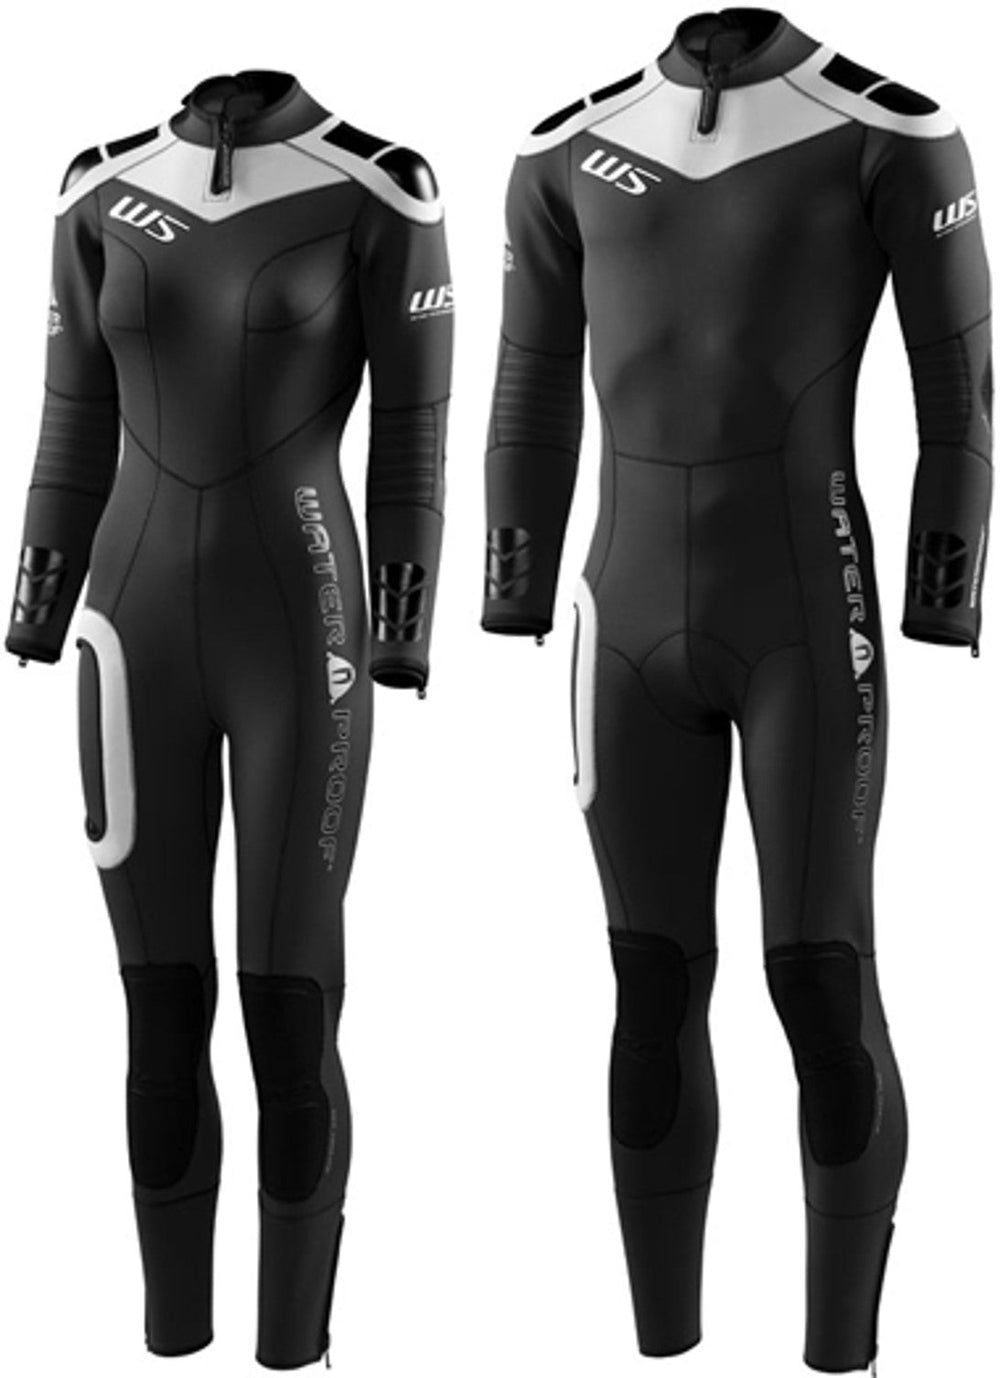 Waterproof W5 3.5mm Wetsuit - Womens by Oyster Diving Shop